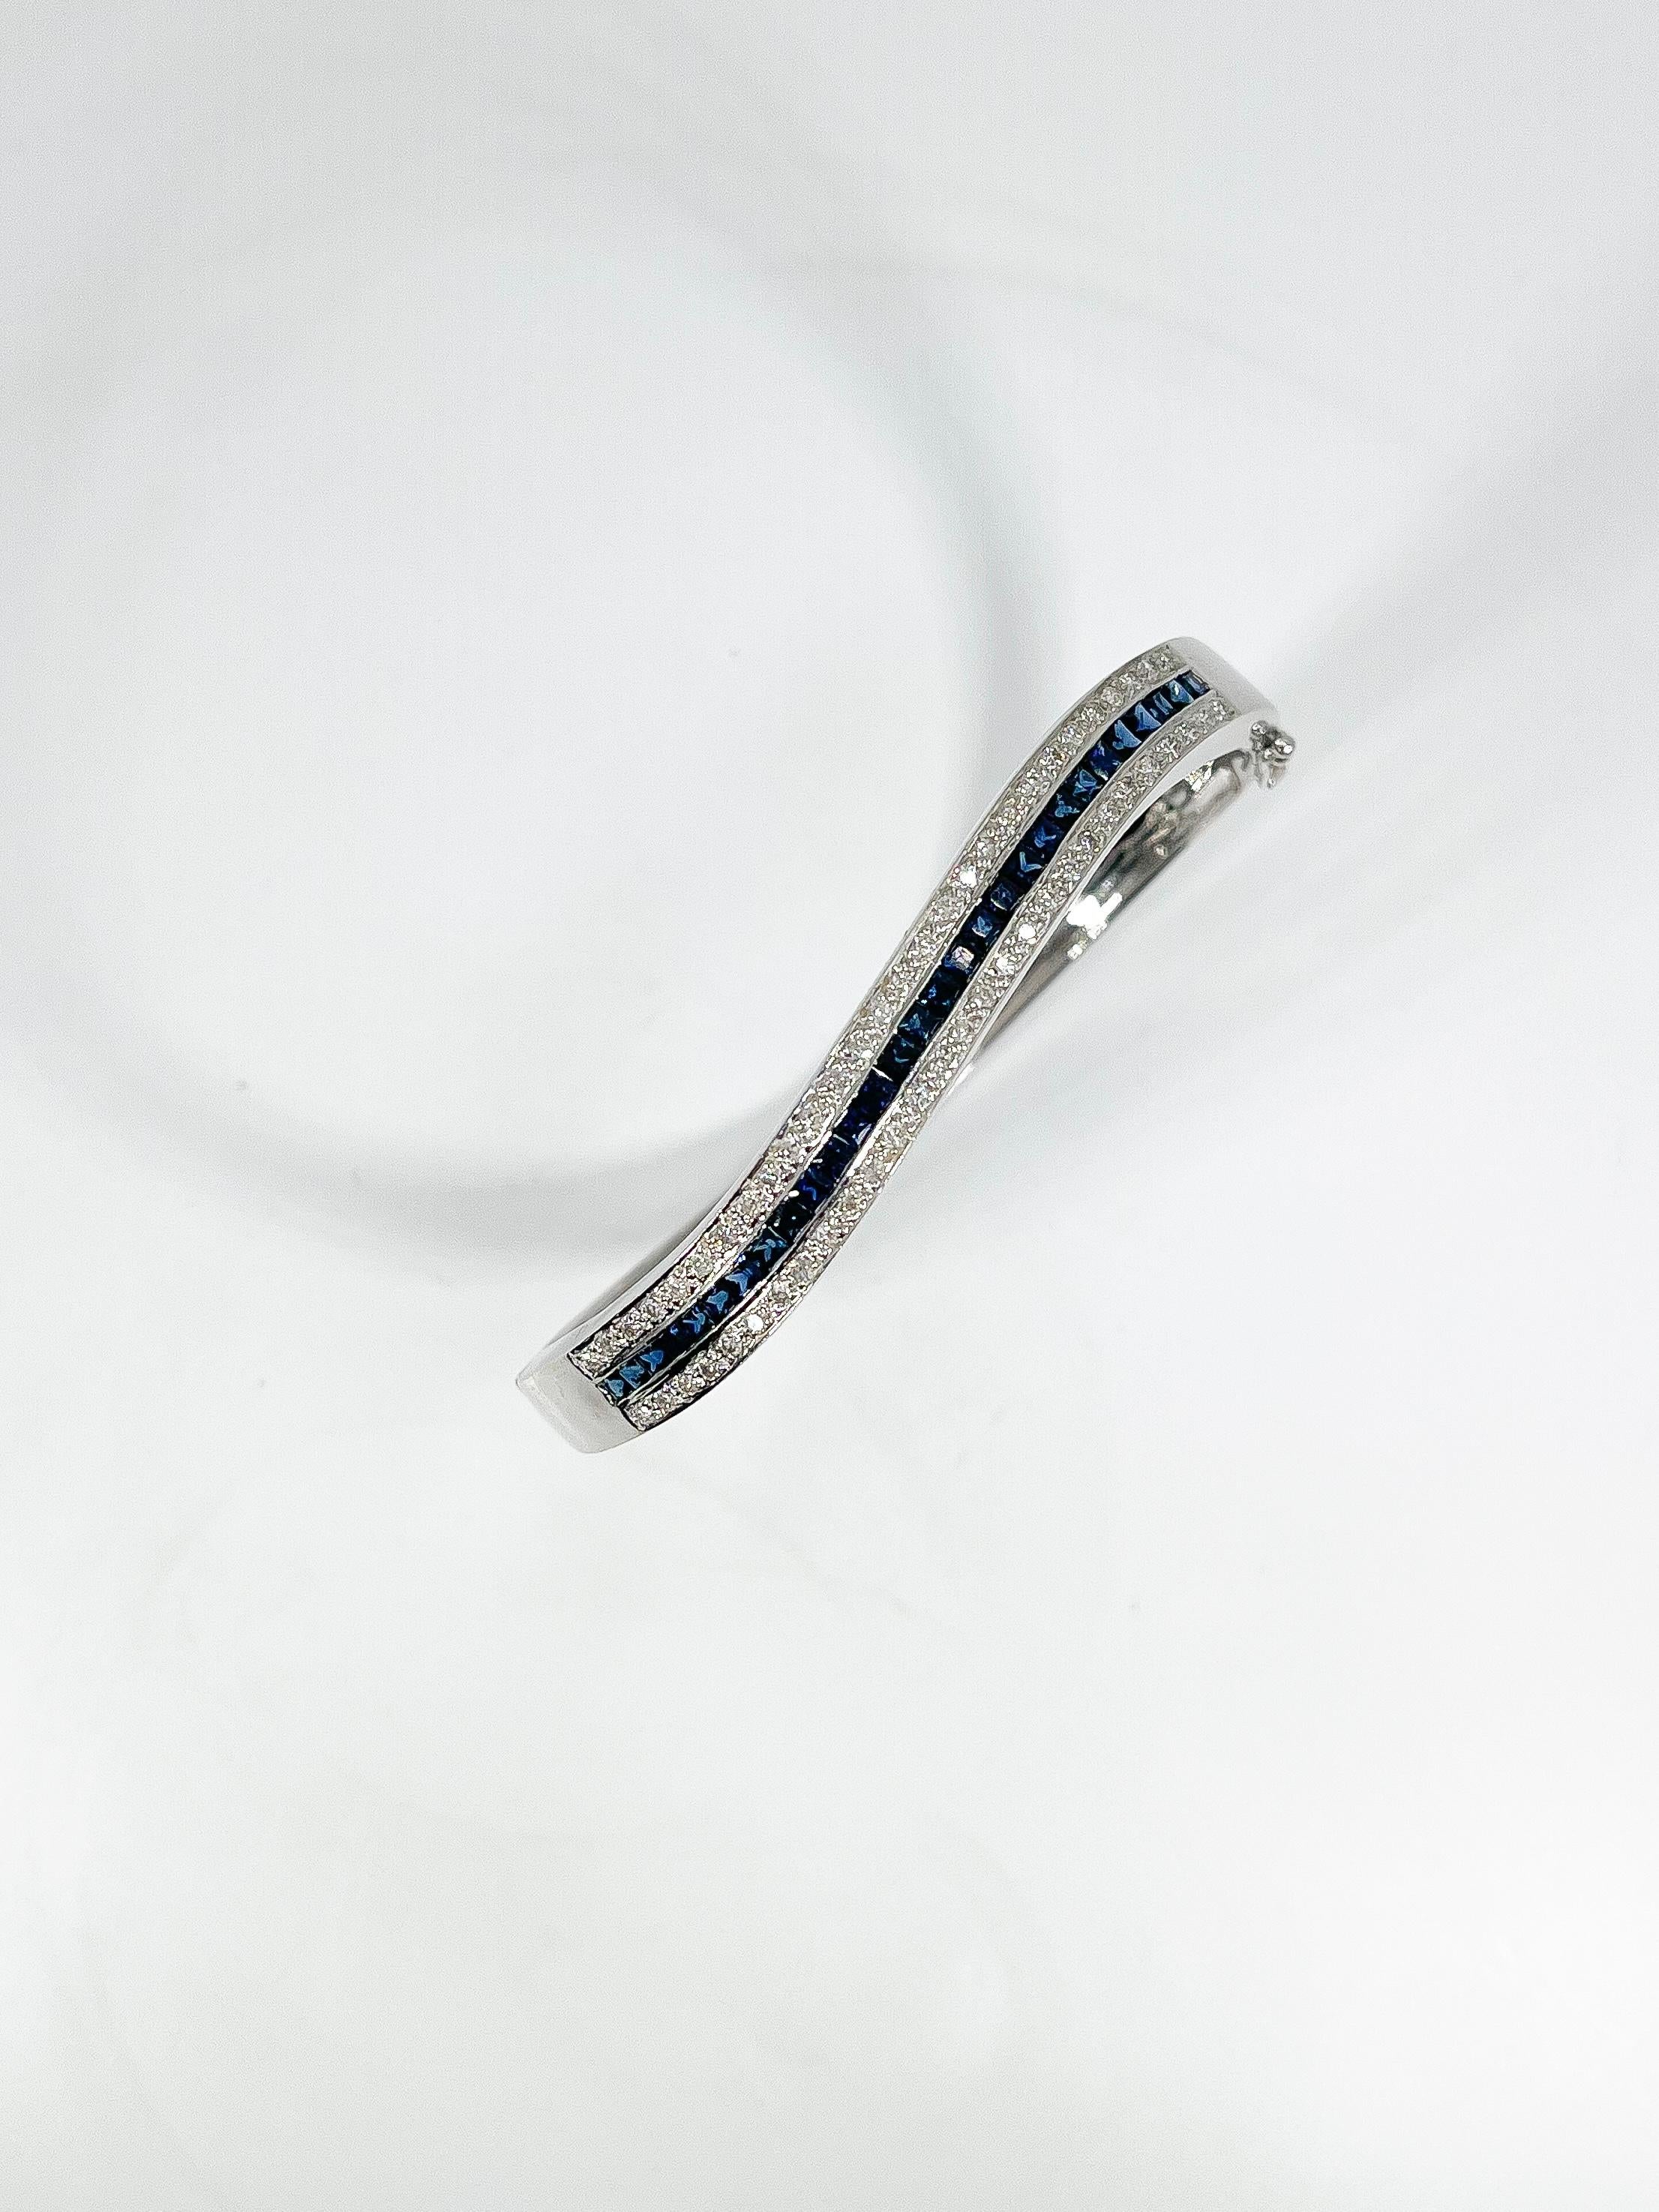 18k white gold 2 CTW sapphire and 1 CTW diamond bangle. All of the diamonds in the bracelet are round and the sapphires are princess cut. The width of the bracelet is 7.1 mm and it has a total weight of 20.69.